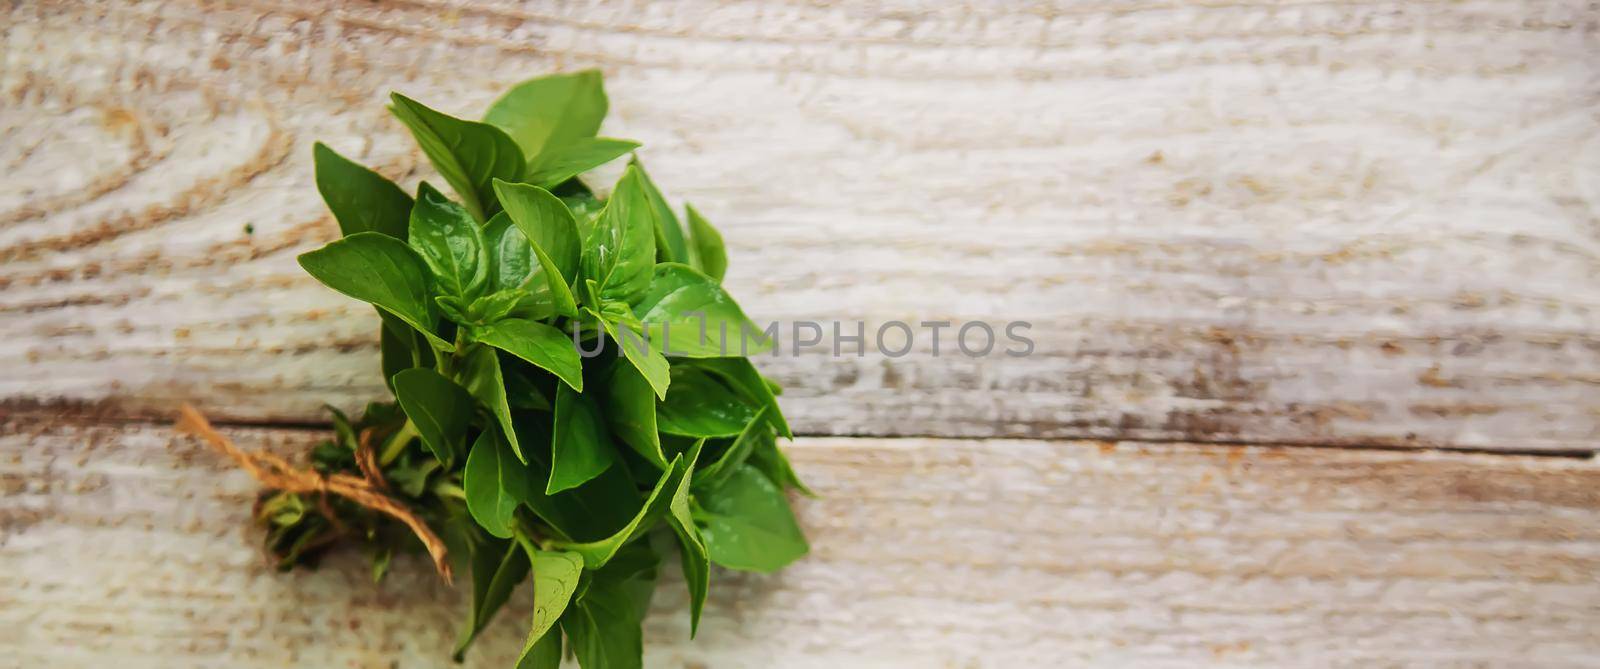 fresh home herbs from the garden. basil. Selective focus. nature.